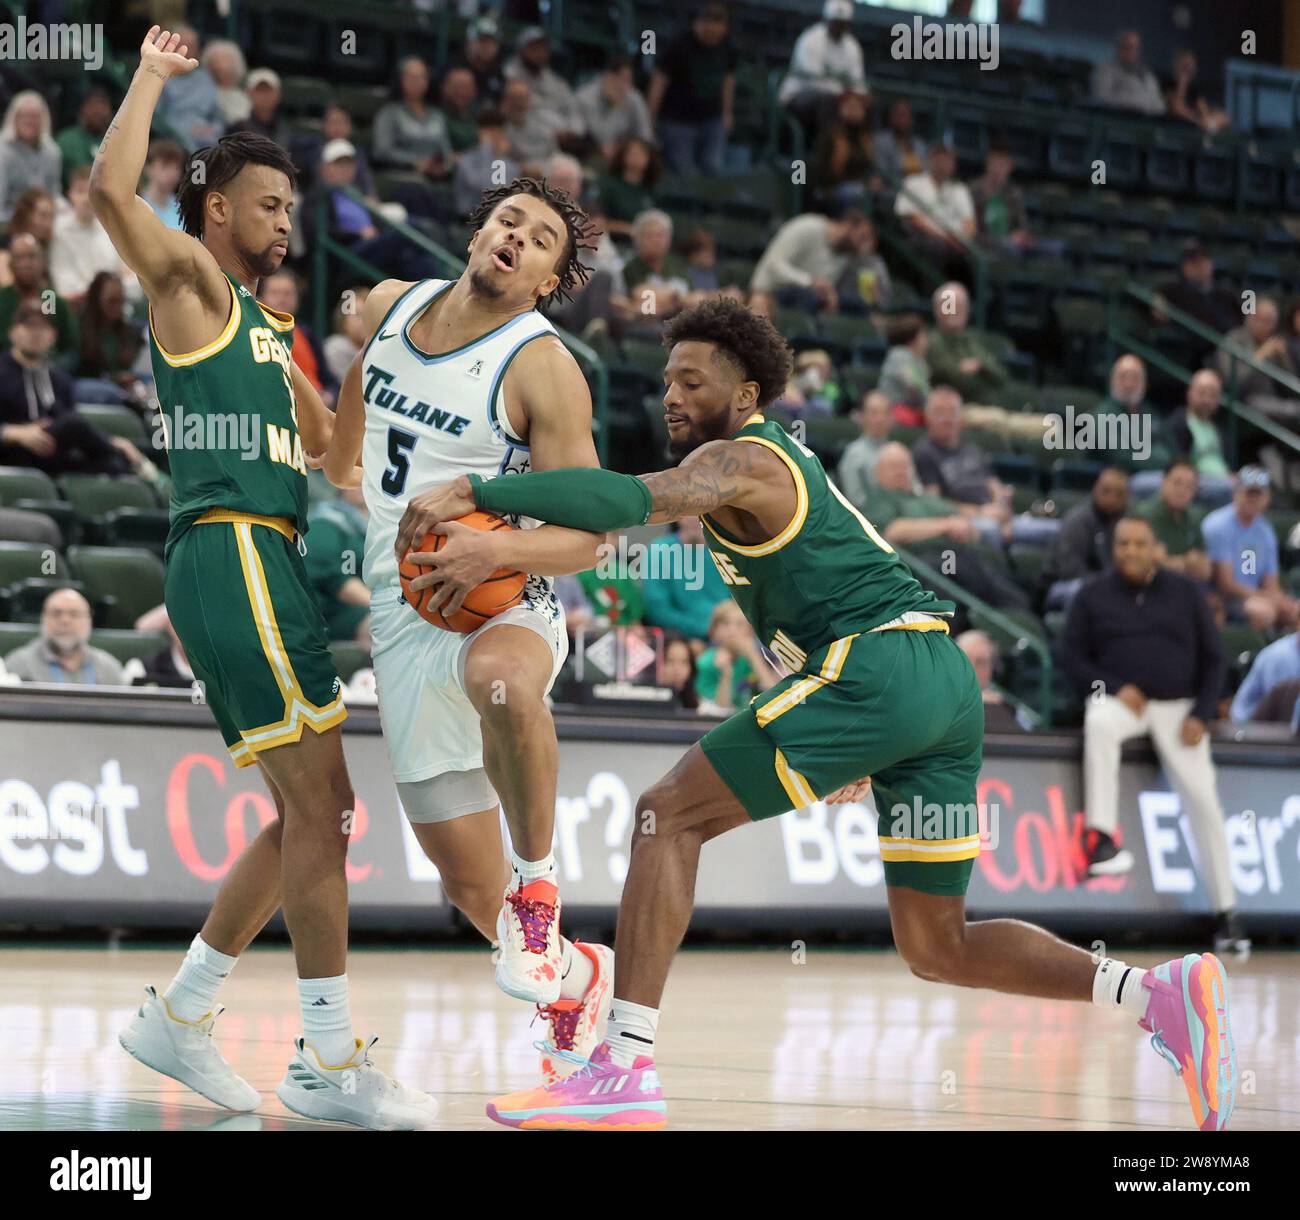 New Orleans, USA. 22nd Dec, 2023. George Mason Patriots guard Jared Billups (0) tries to strip the ball from Tulane Green Wave forward Collin Holloway (5) during a men's basketball game at Fogleman Arena in New Orleans, Louisiana on Friday, December 22, 2023. (Photo by Peter G. Forest/Sipa USA) Credit: Sipa USA/Alamy Live News Stock Photo